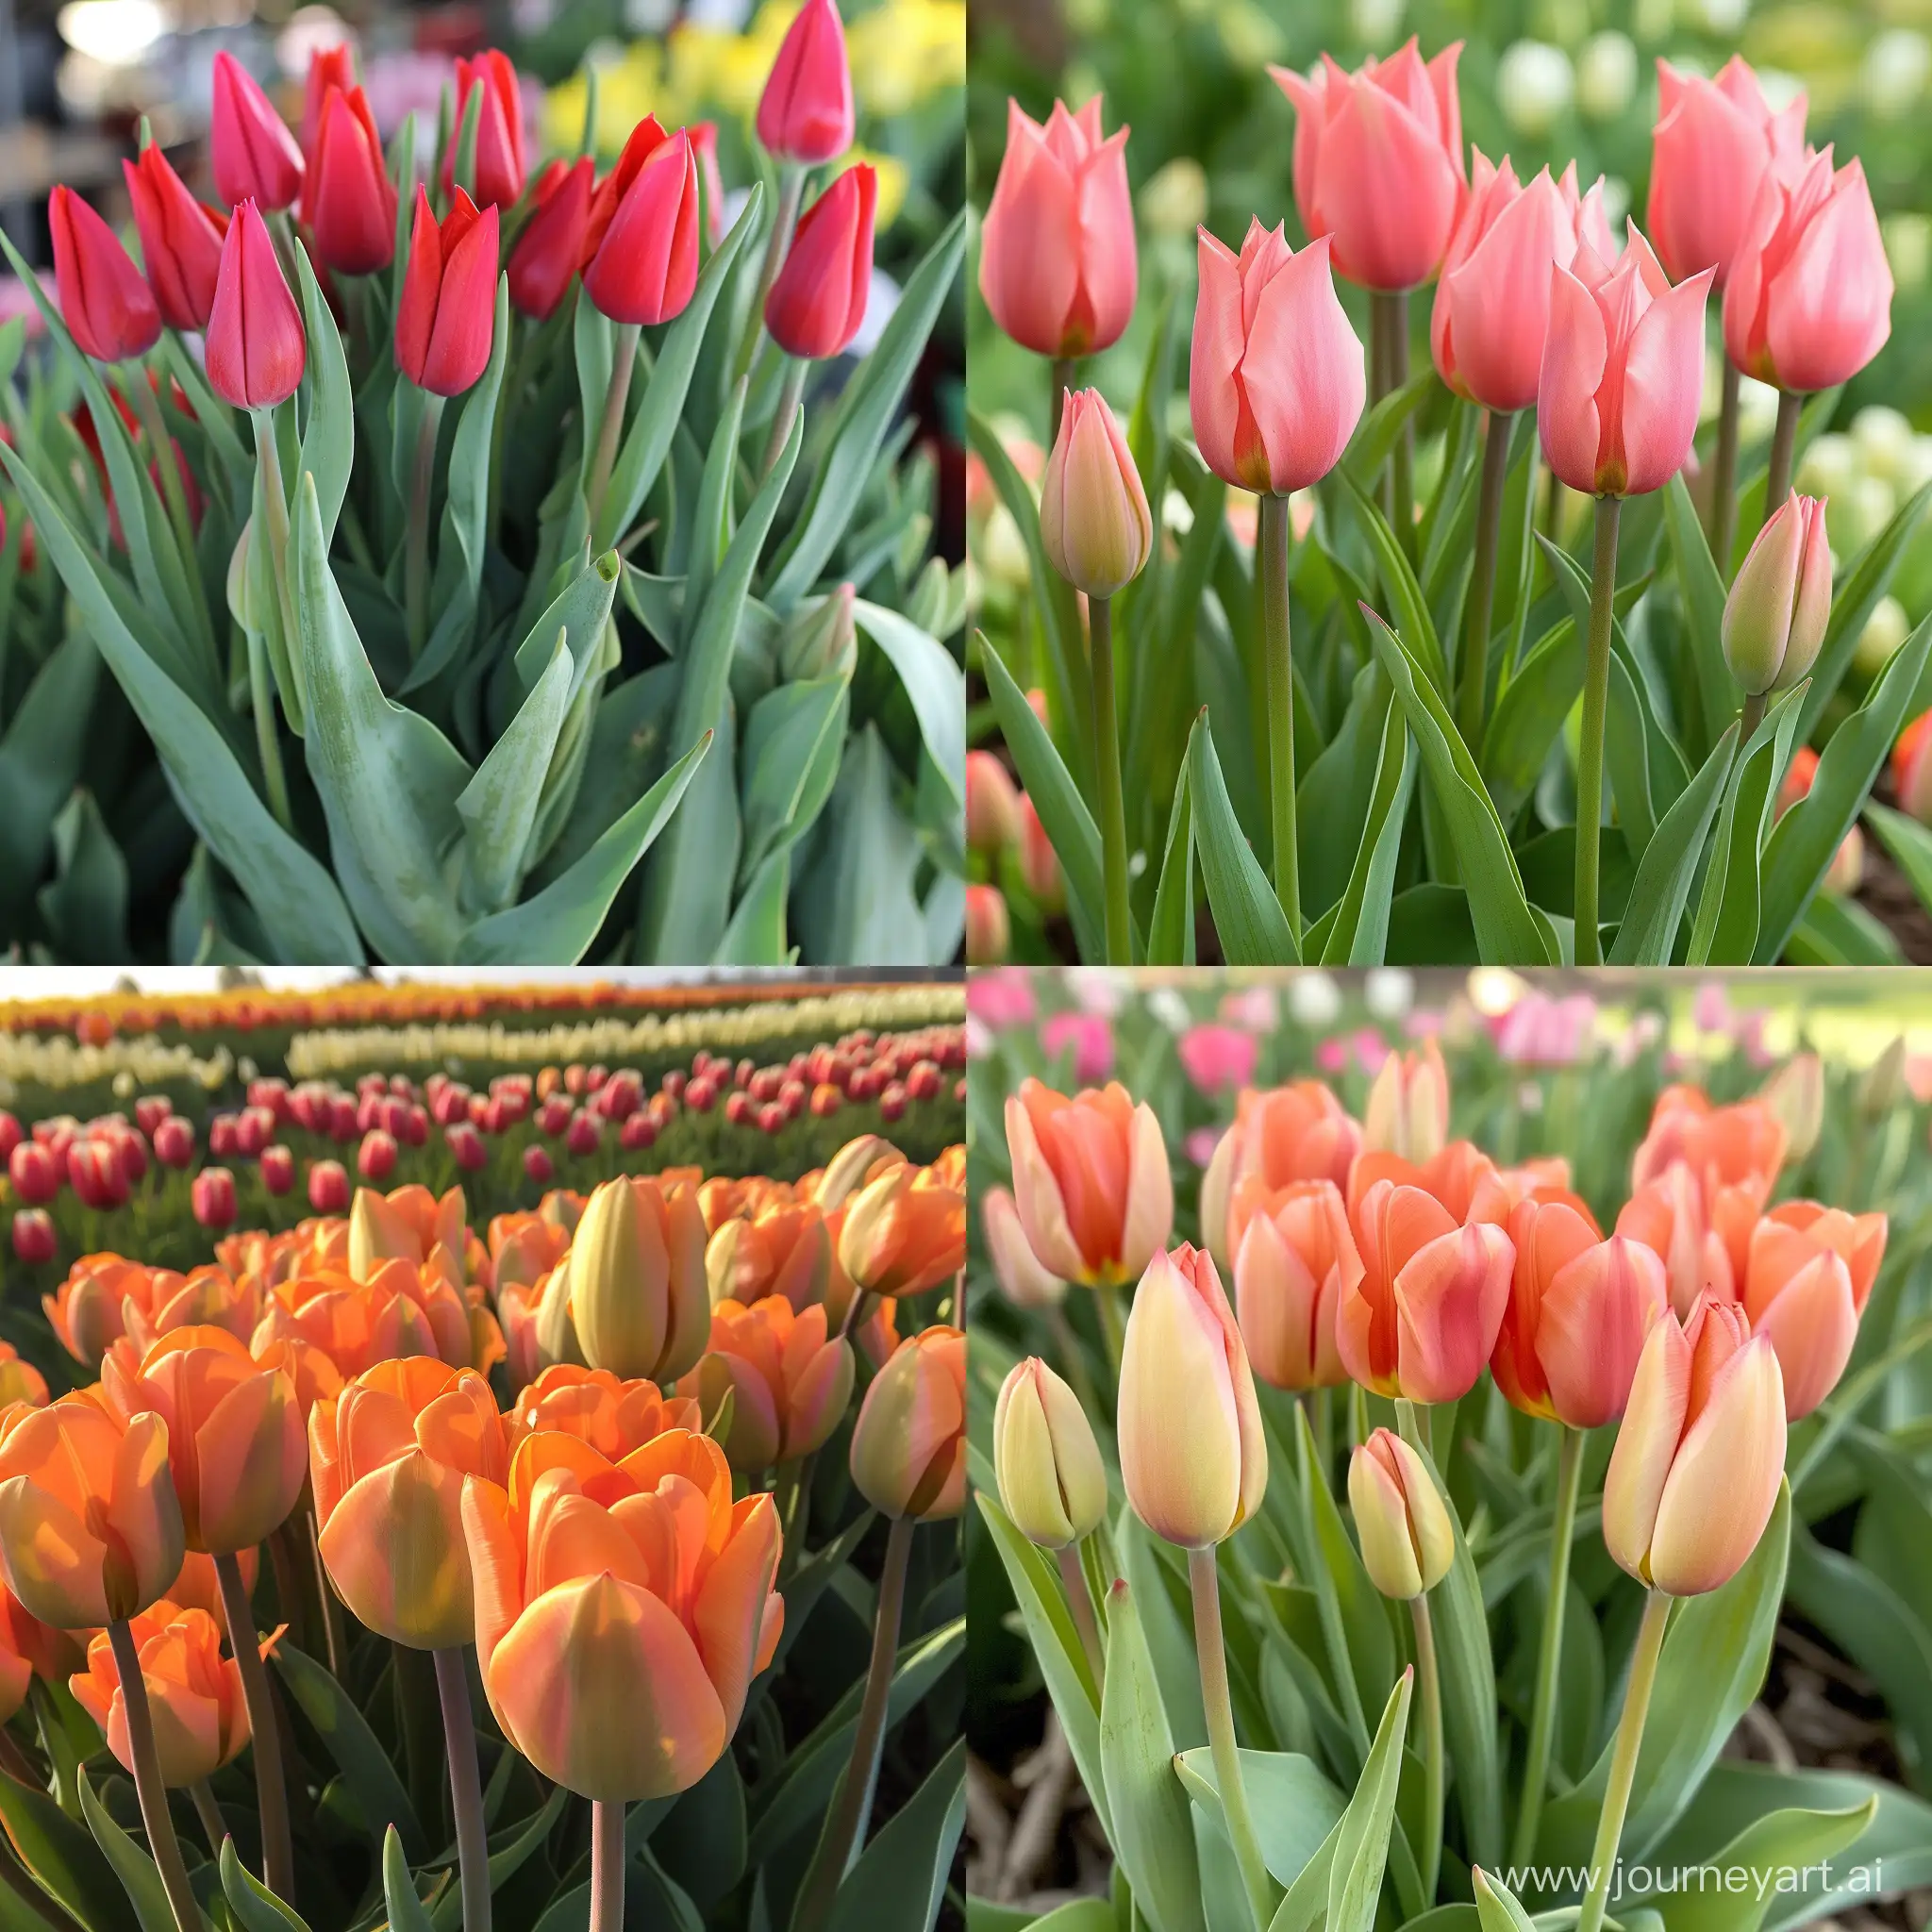 Vibrant-Field-of-a-Million-Tulips-with-Large-Buds